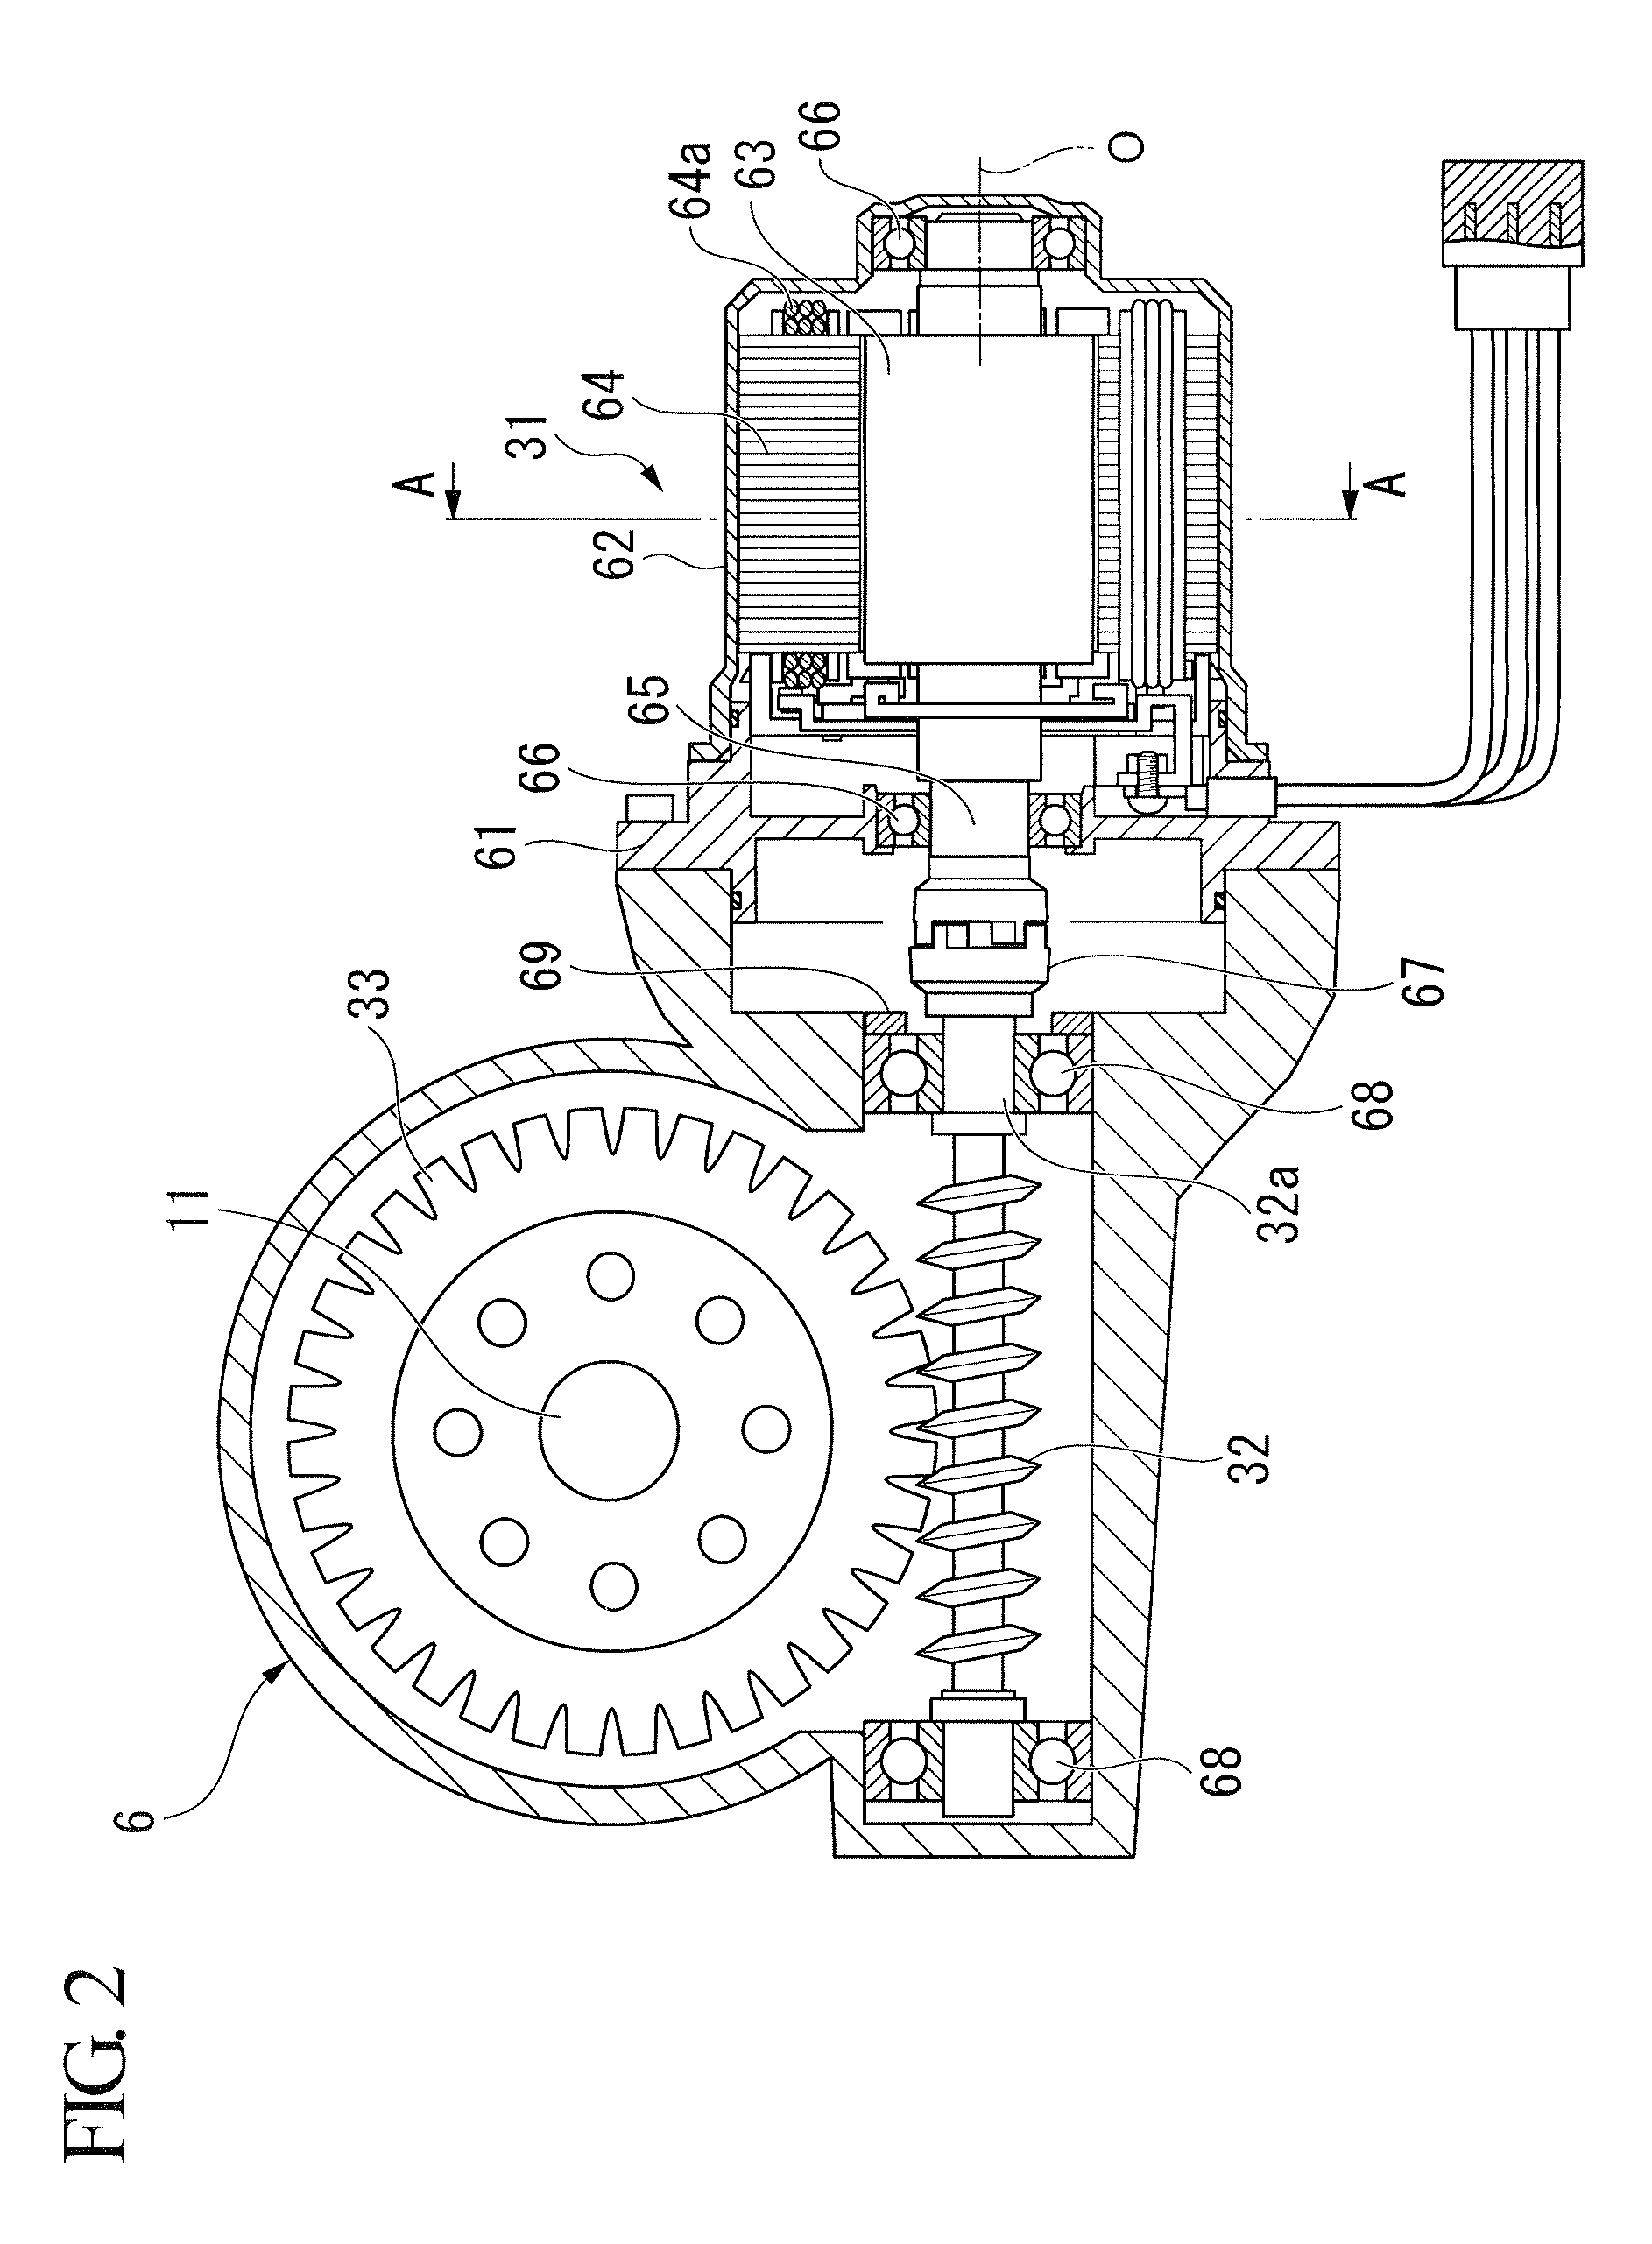 Electric steering system